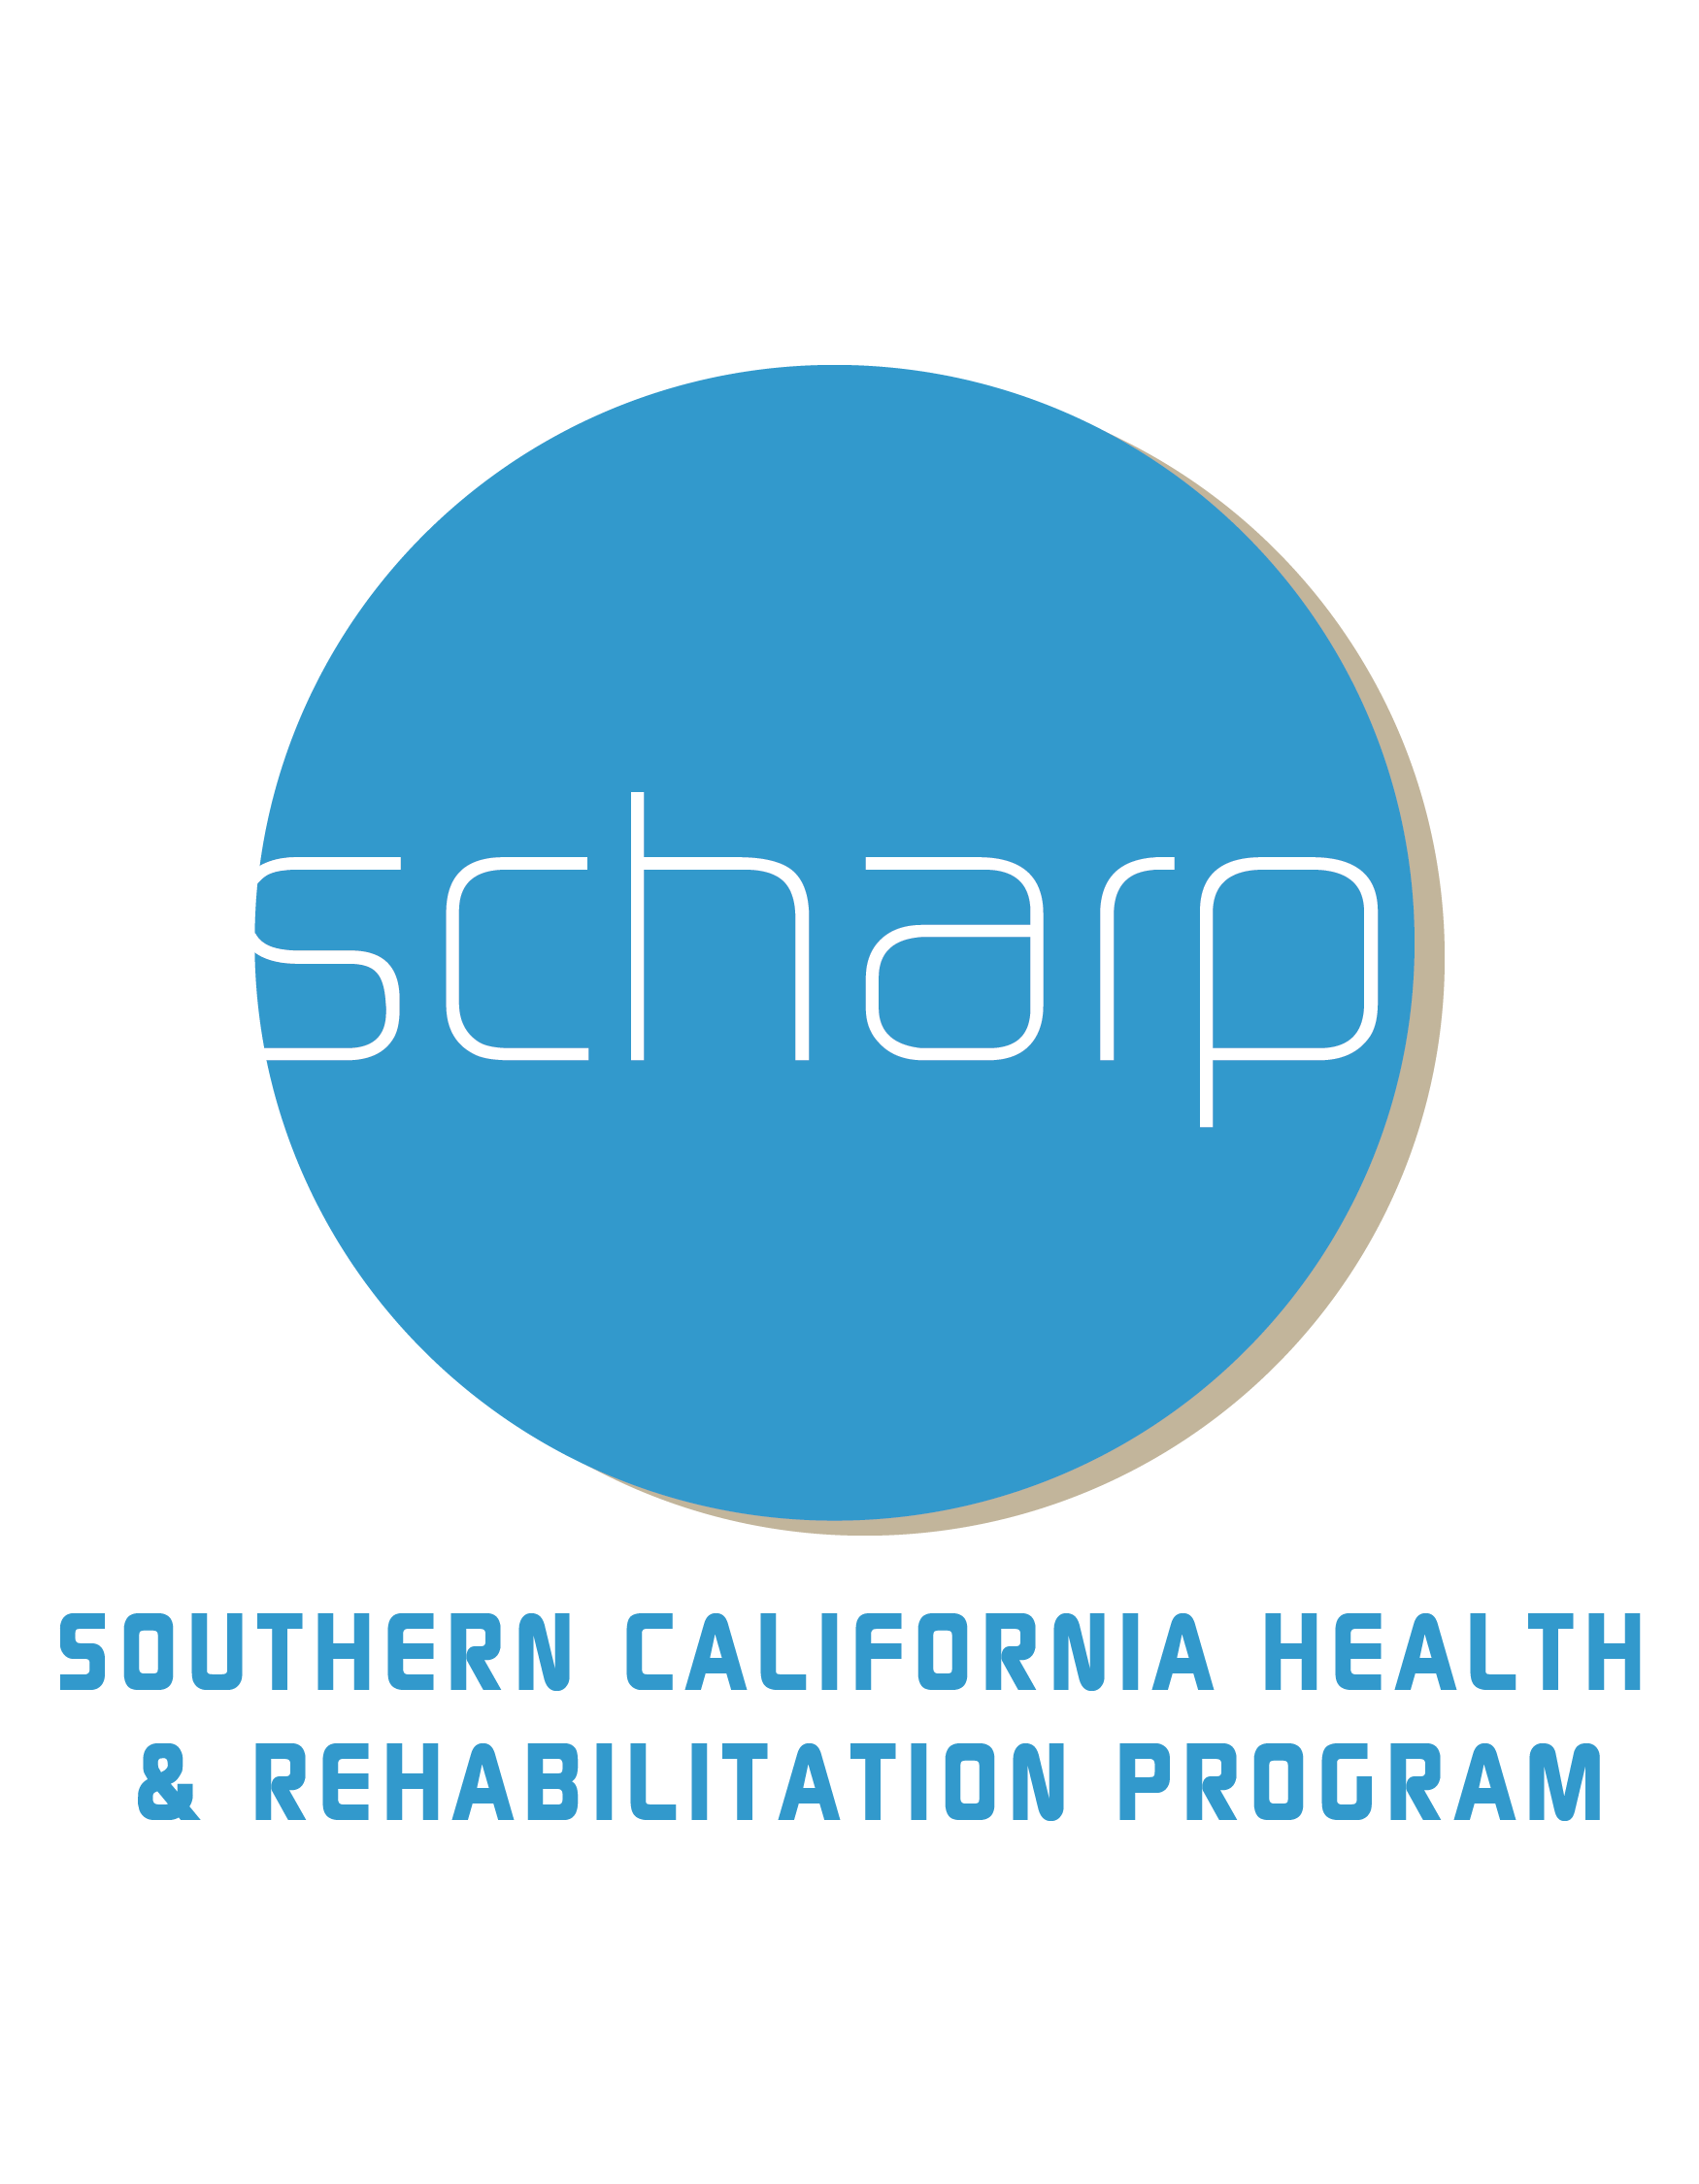 Featured Image for Southern California Health And Rehabilitation Program